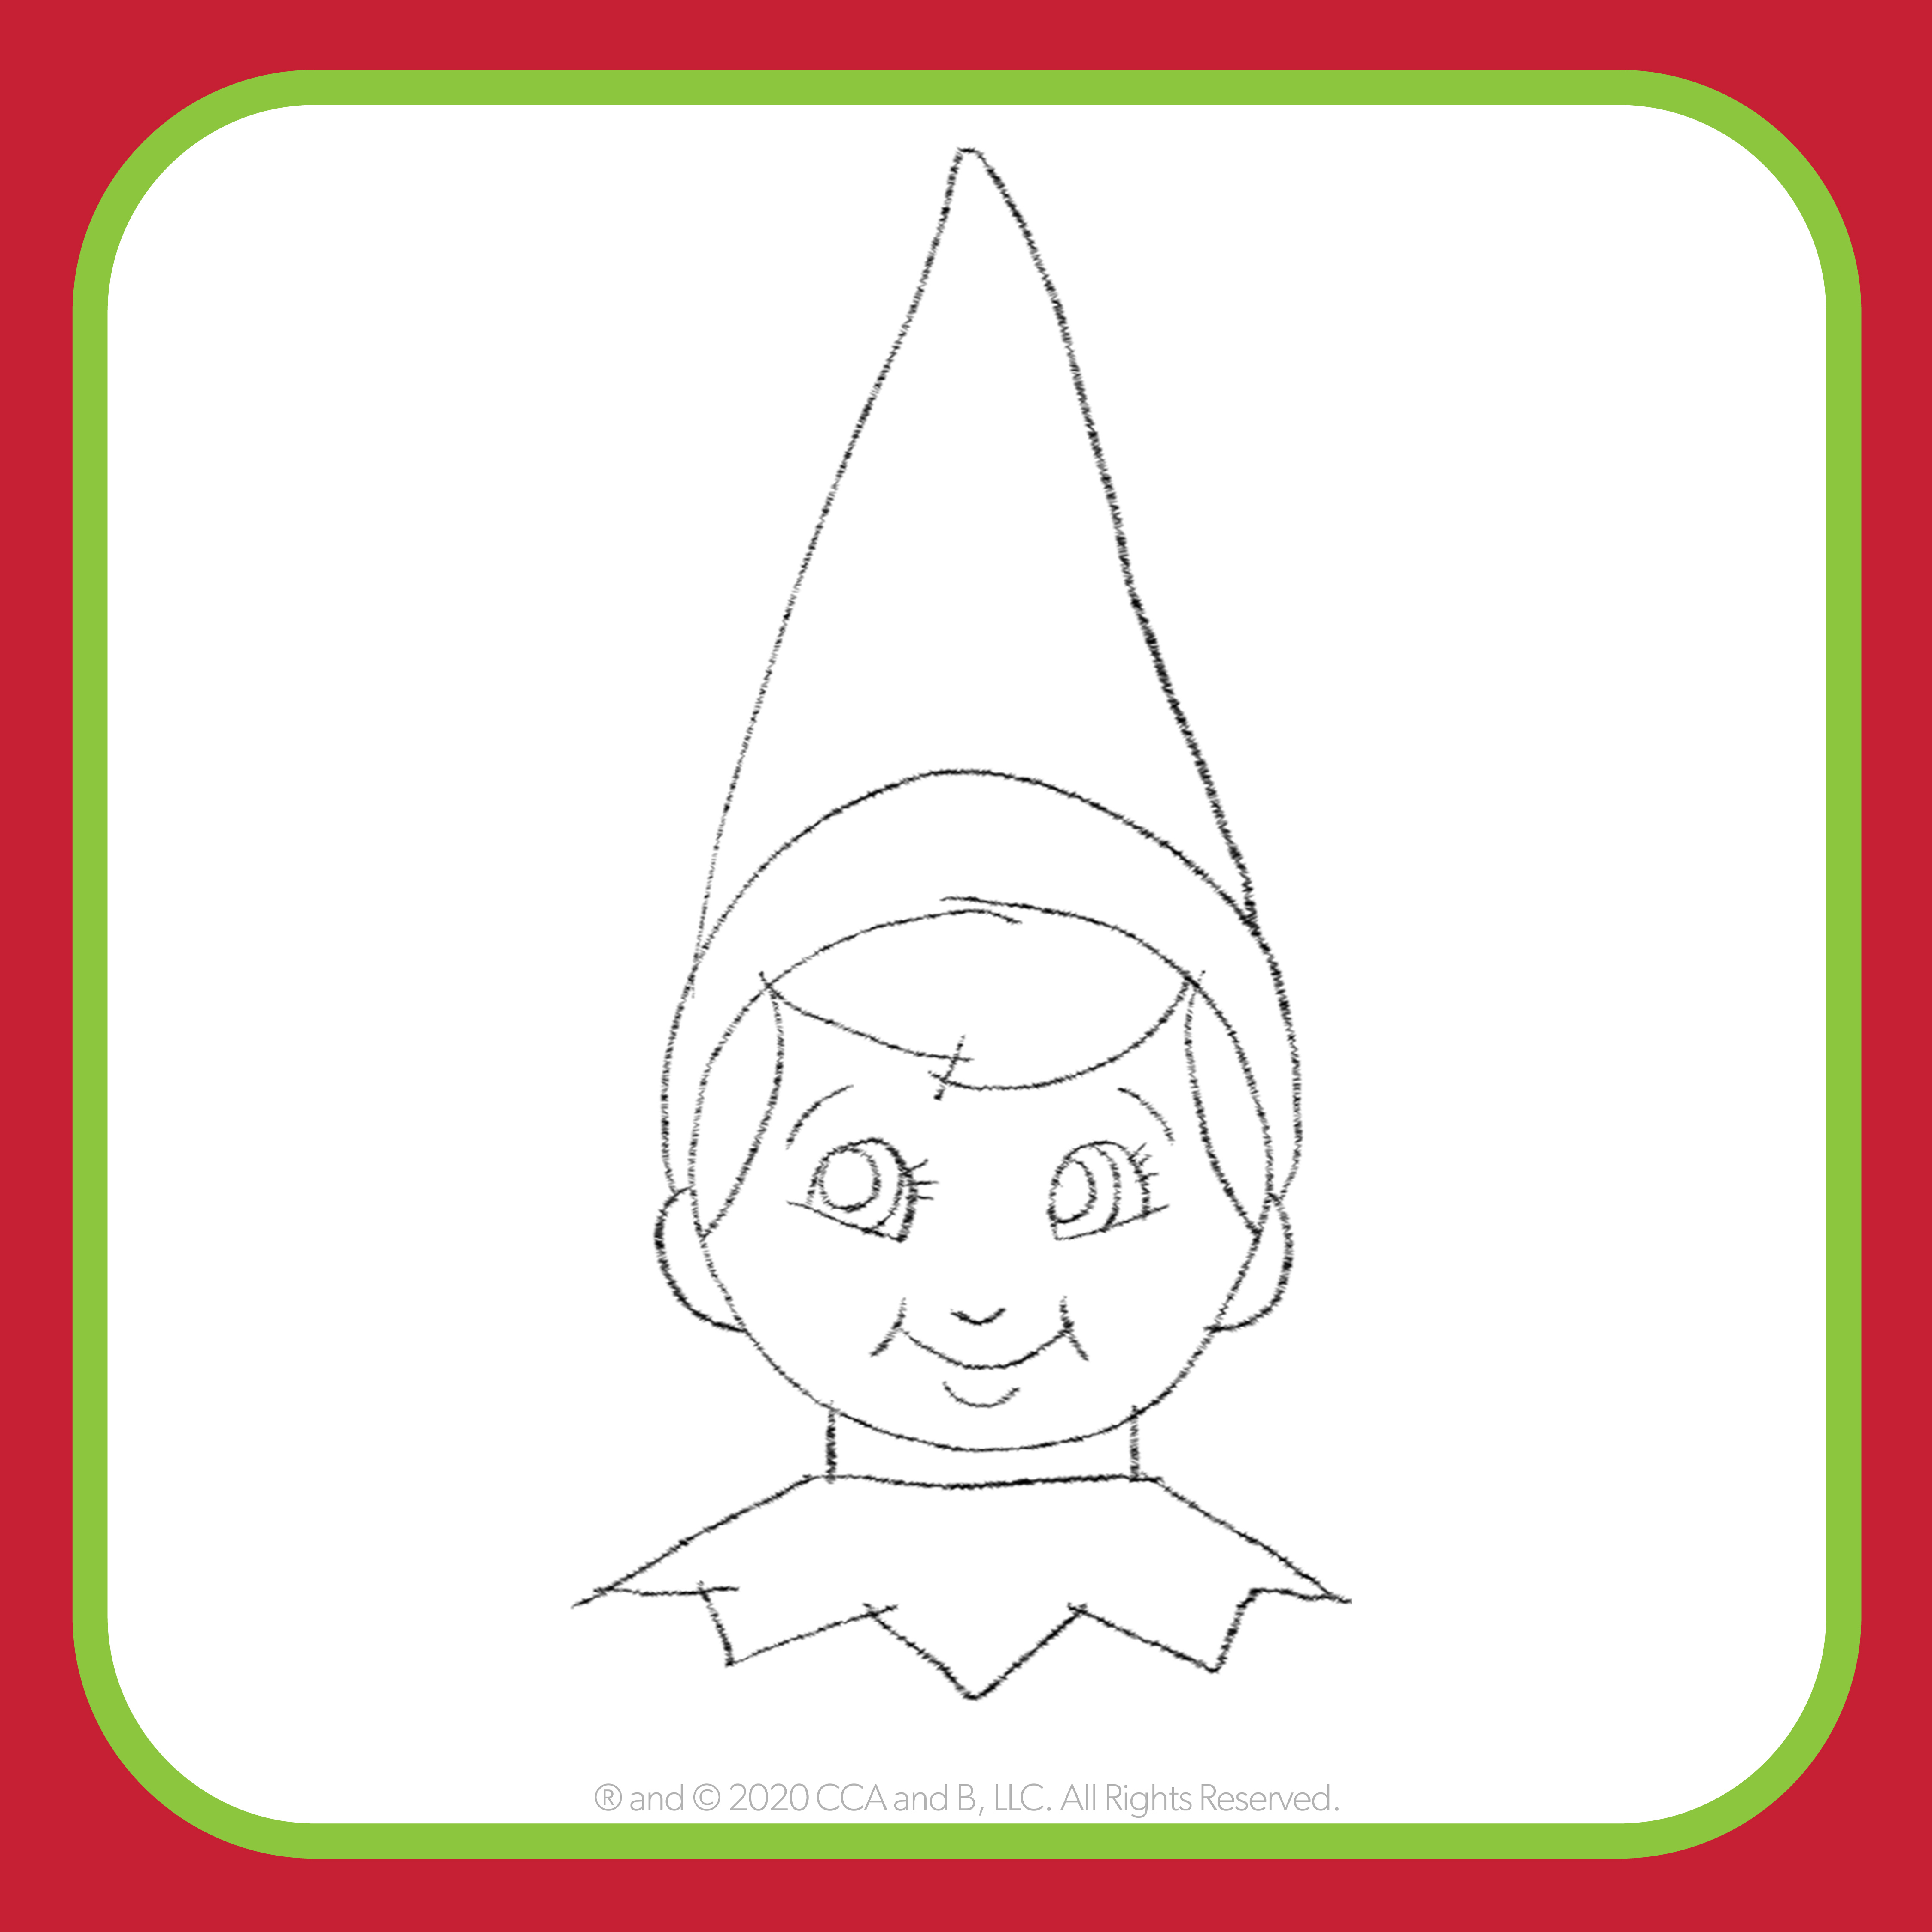 Learn How to Draw The Elf on the Shelf® | The Elf on the Shelf